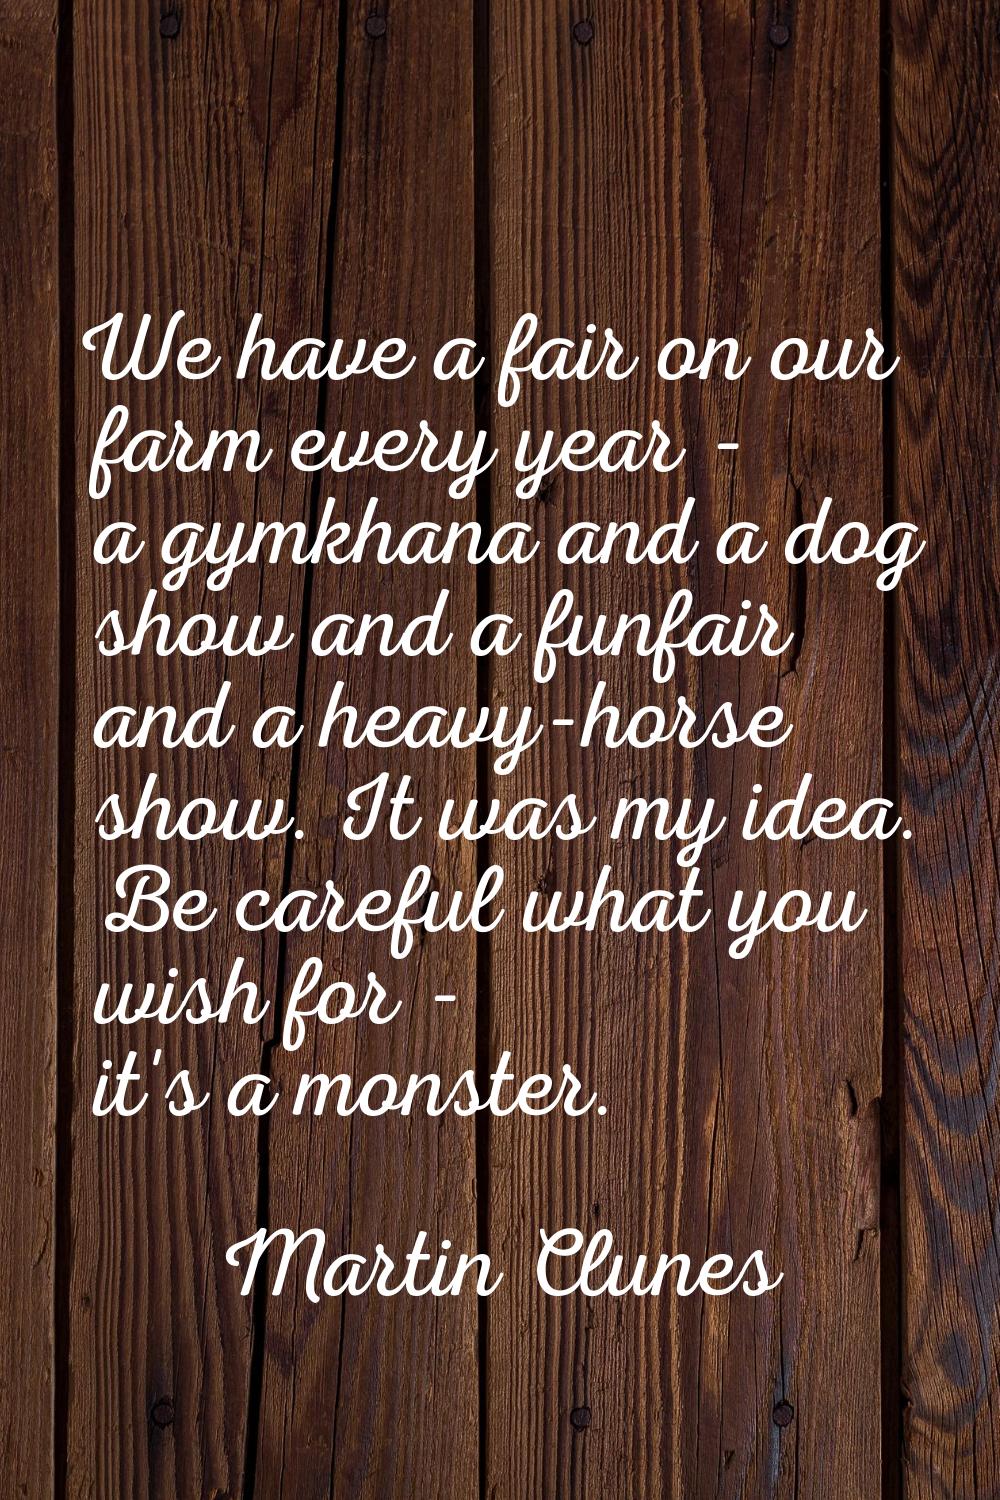 We have a fair on our farm every year - a gymkhana and a dog show and a funfair and a heavy-horse s